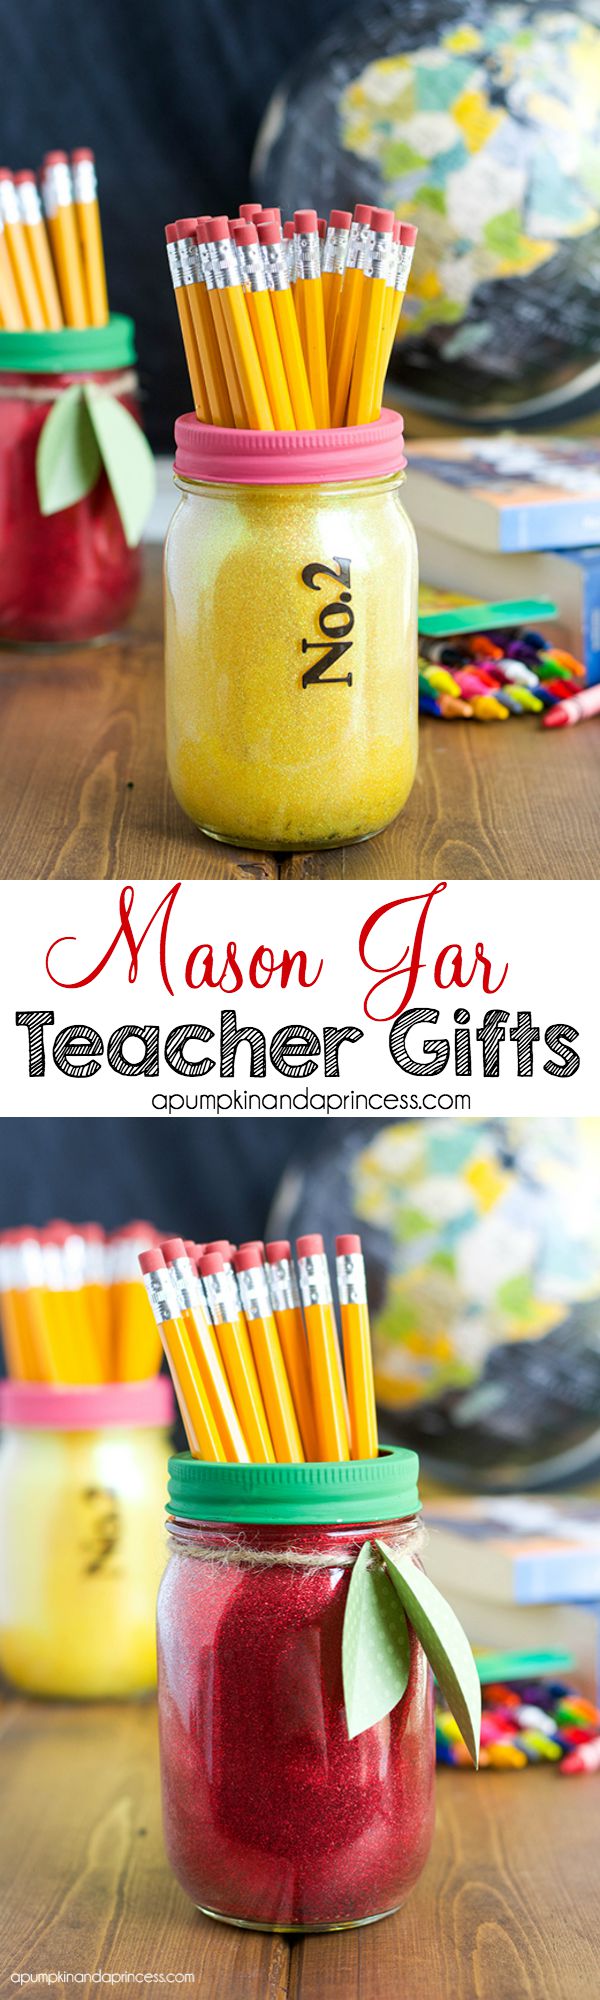 8+ Easy to Make Gifts That Teachers Will Love| DIY Gifts, DIY Gifts Ideas, DIY Gifts for Teachers, DIY Gifts Easy, Easy DIY Gifts, DIY, DIY Project, DIY Project Ideas